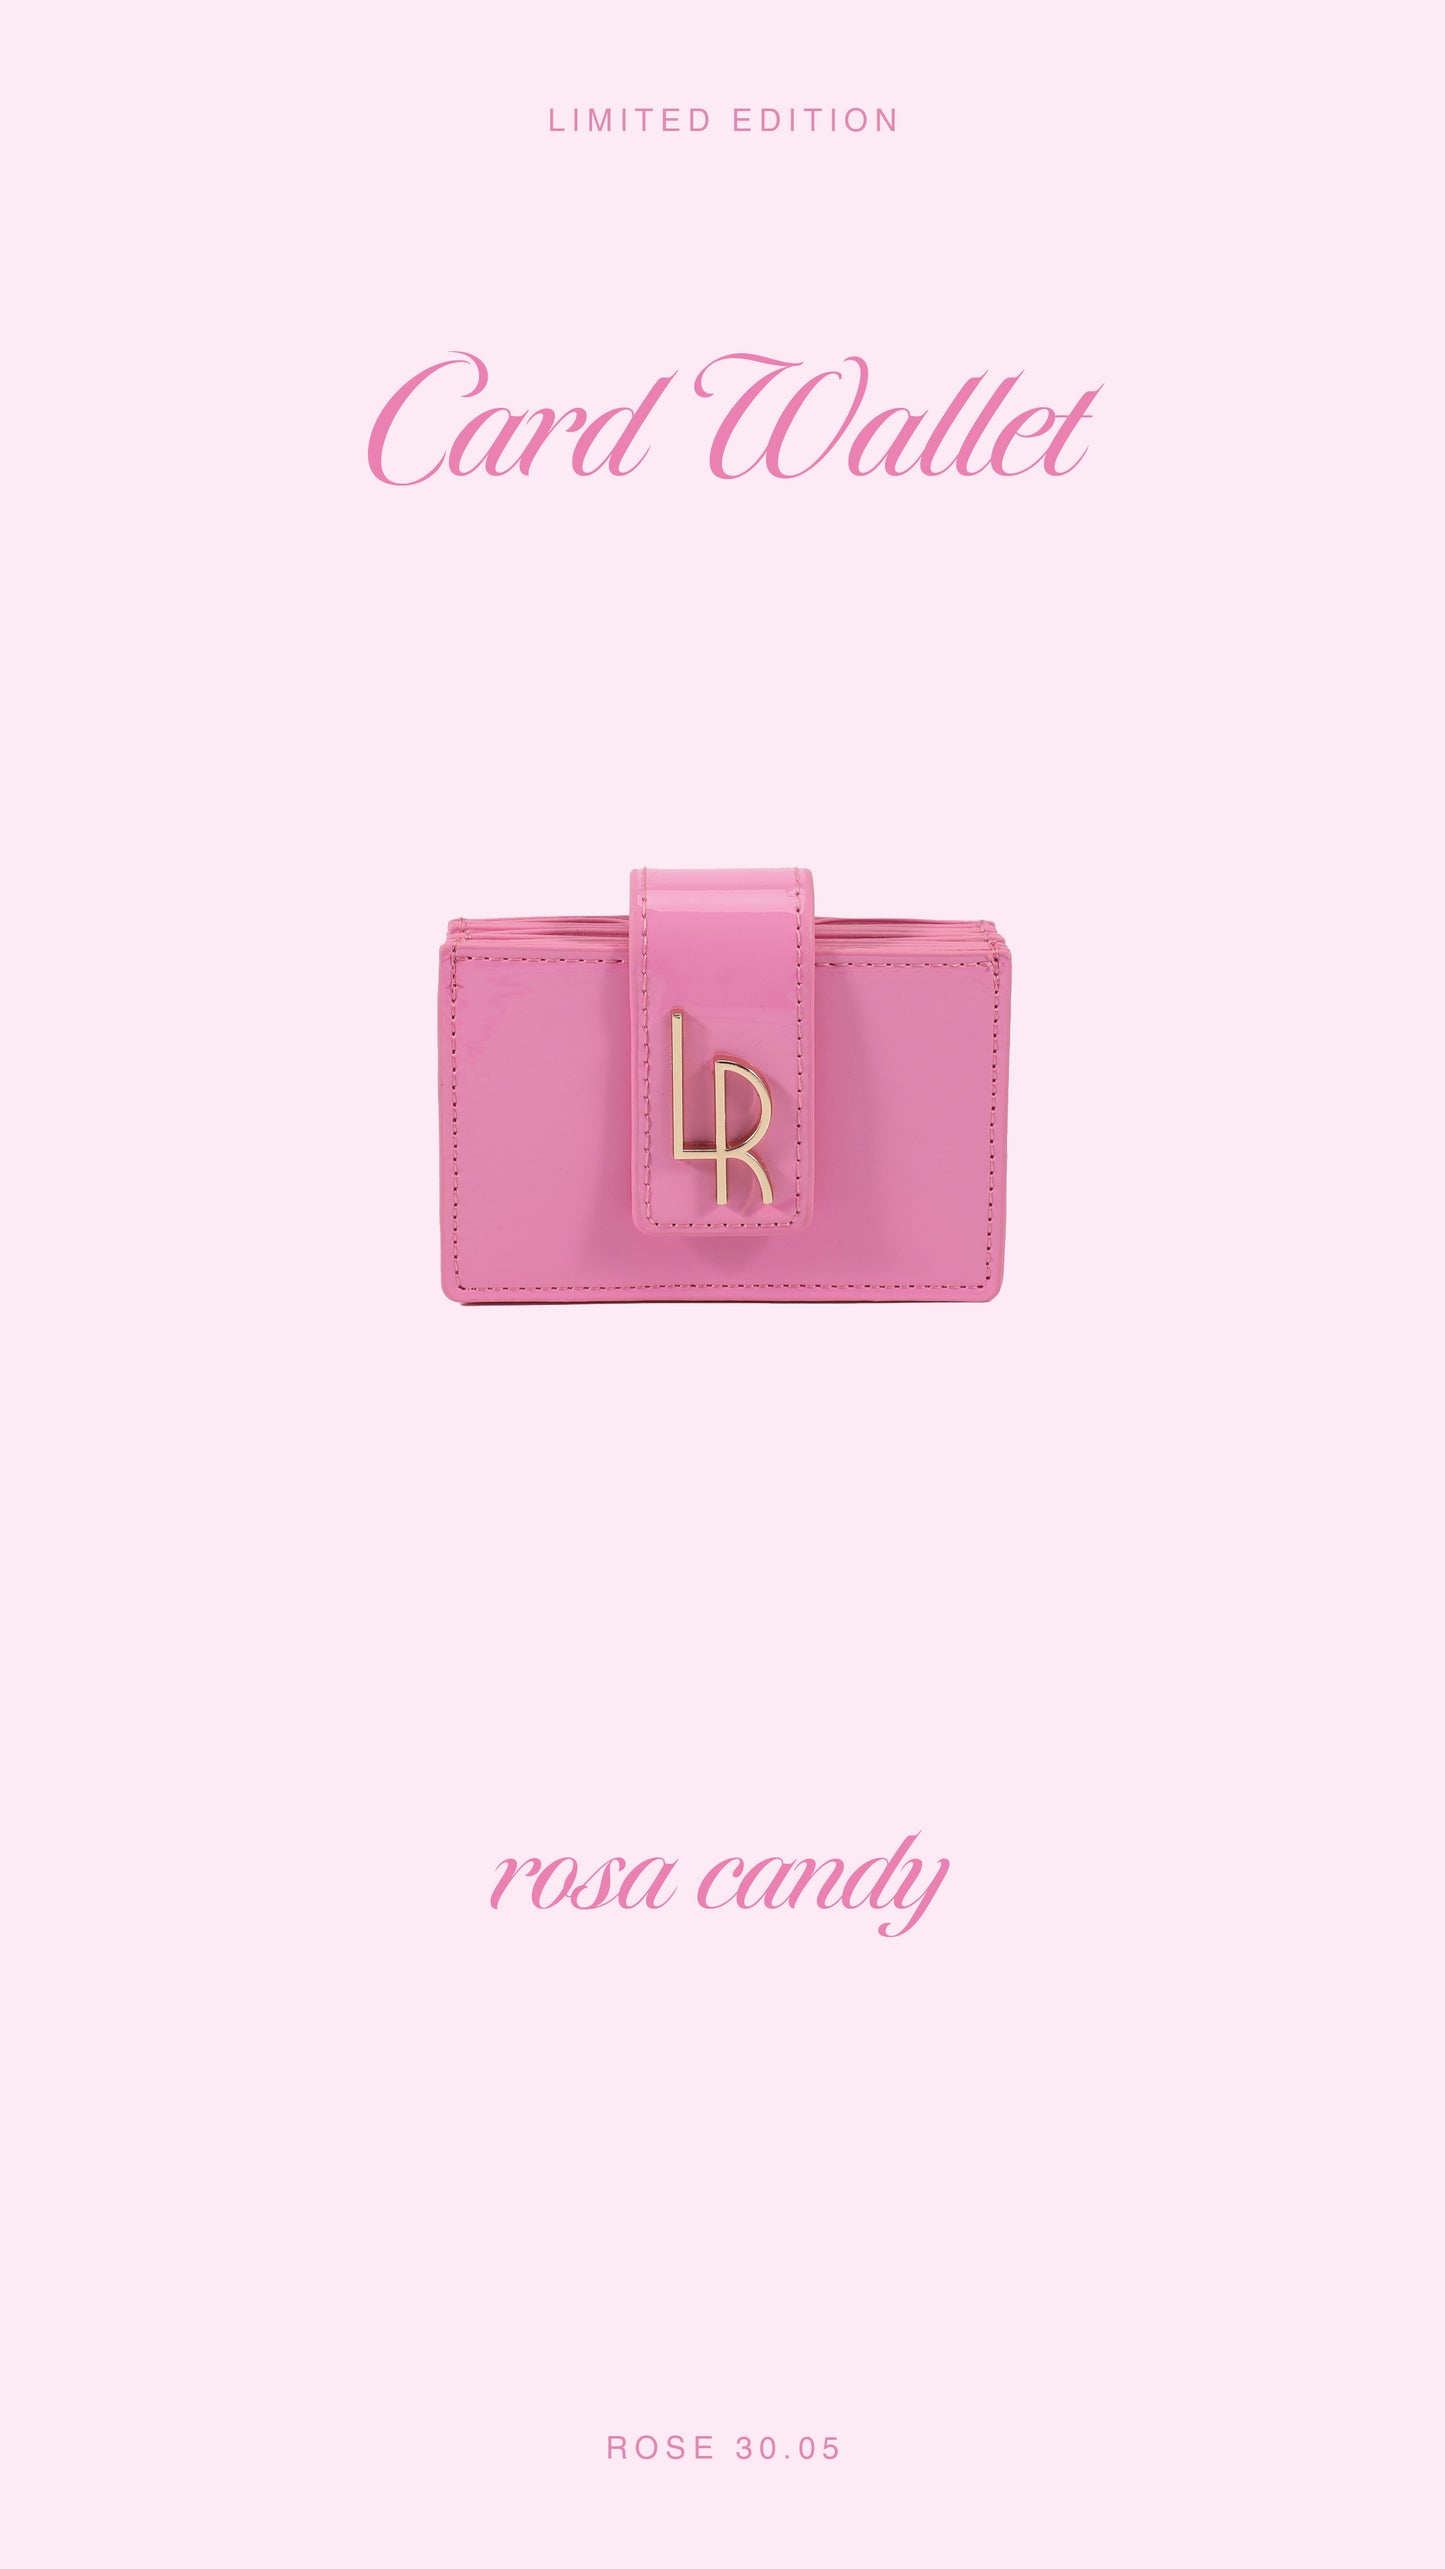 ROSE CARD WALLET 30.05 LE - PINK CANDY